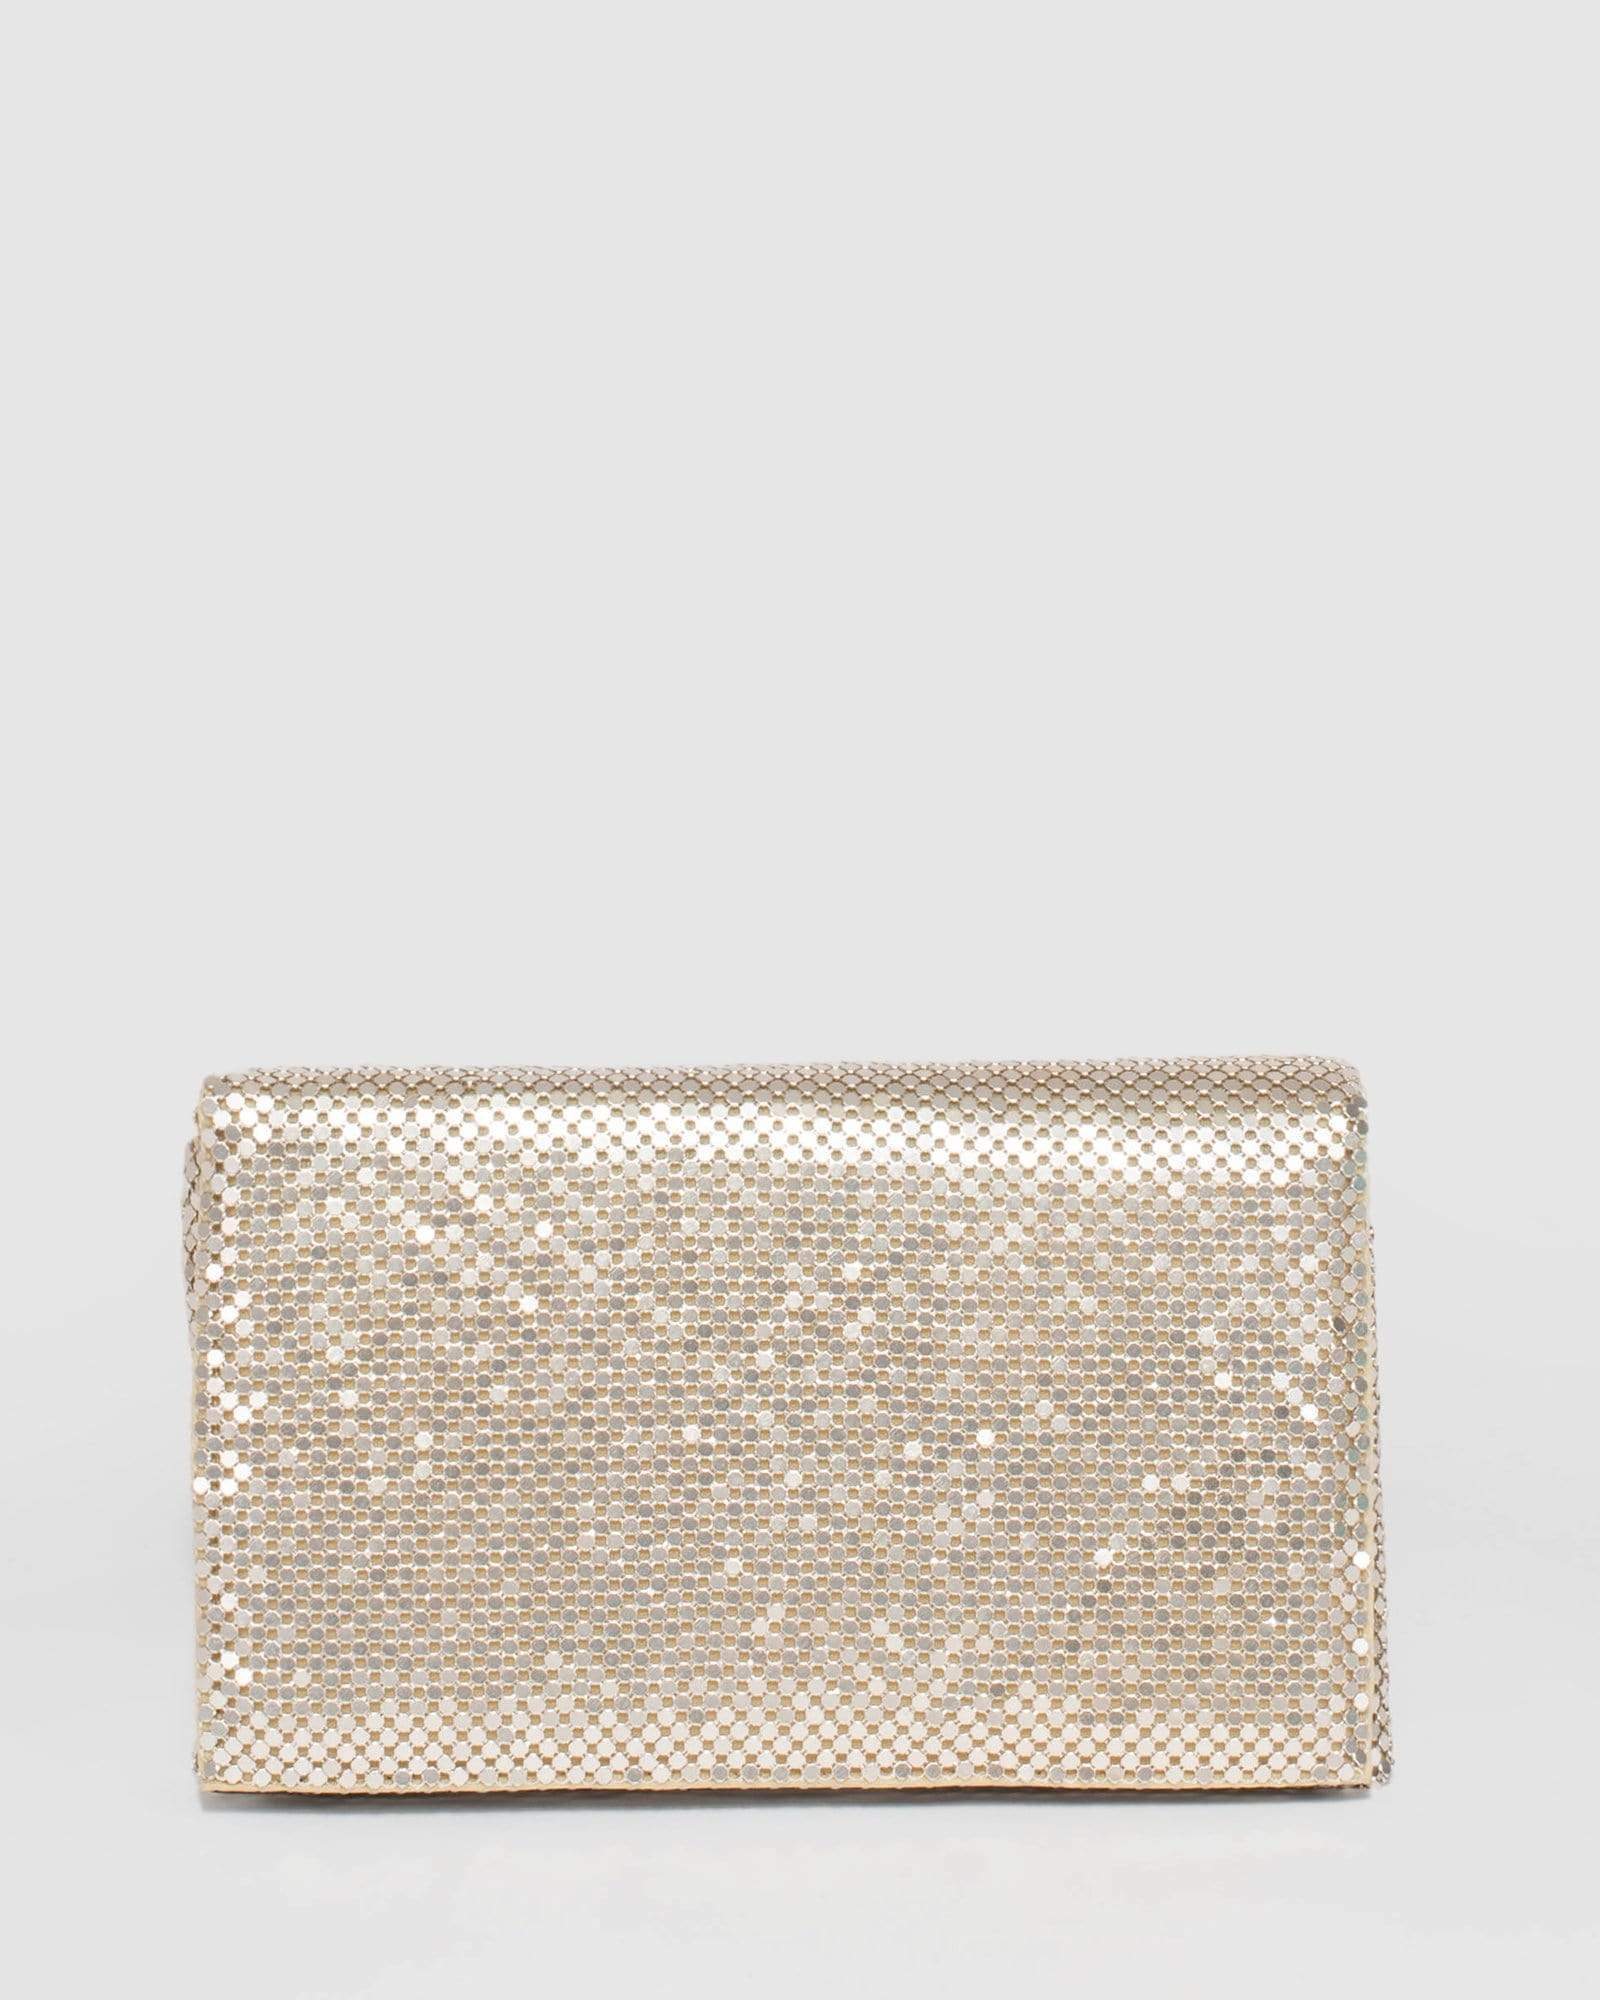 Image of Gold Audrina Clutch Bag